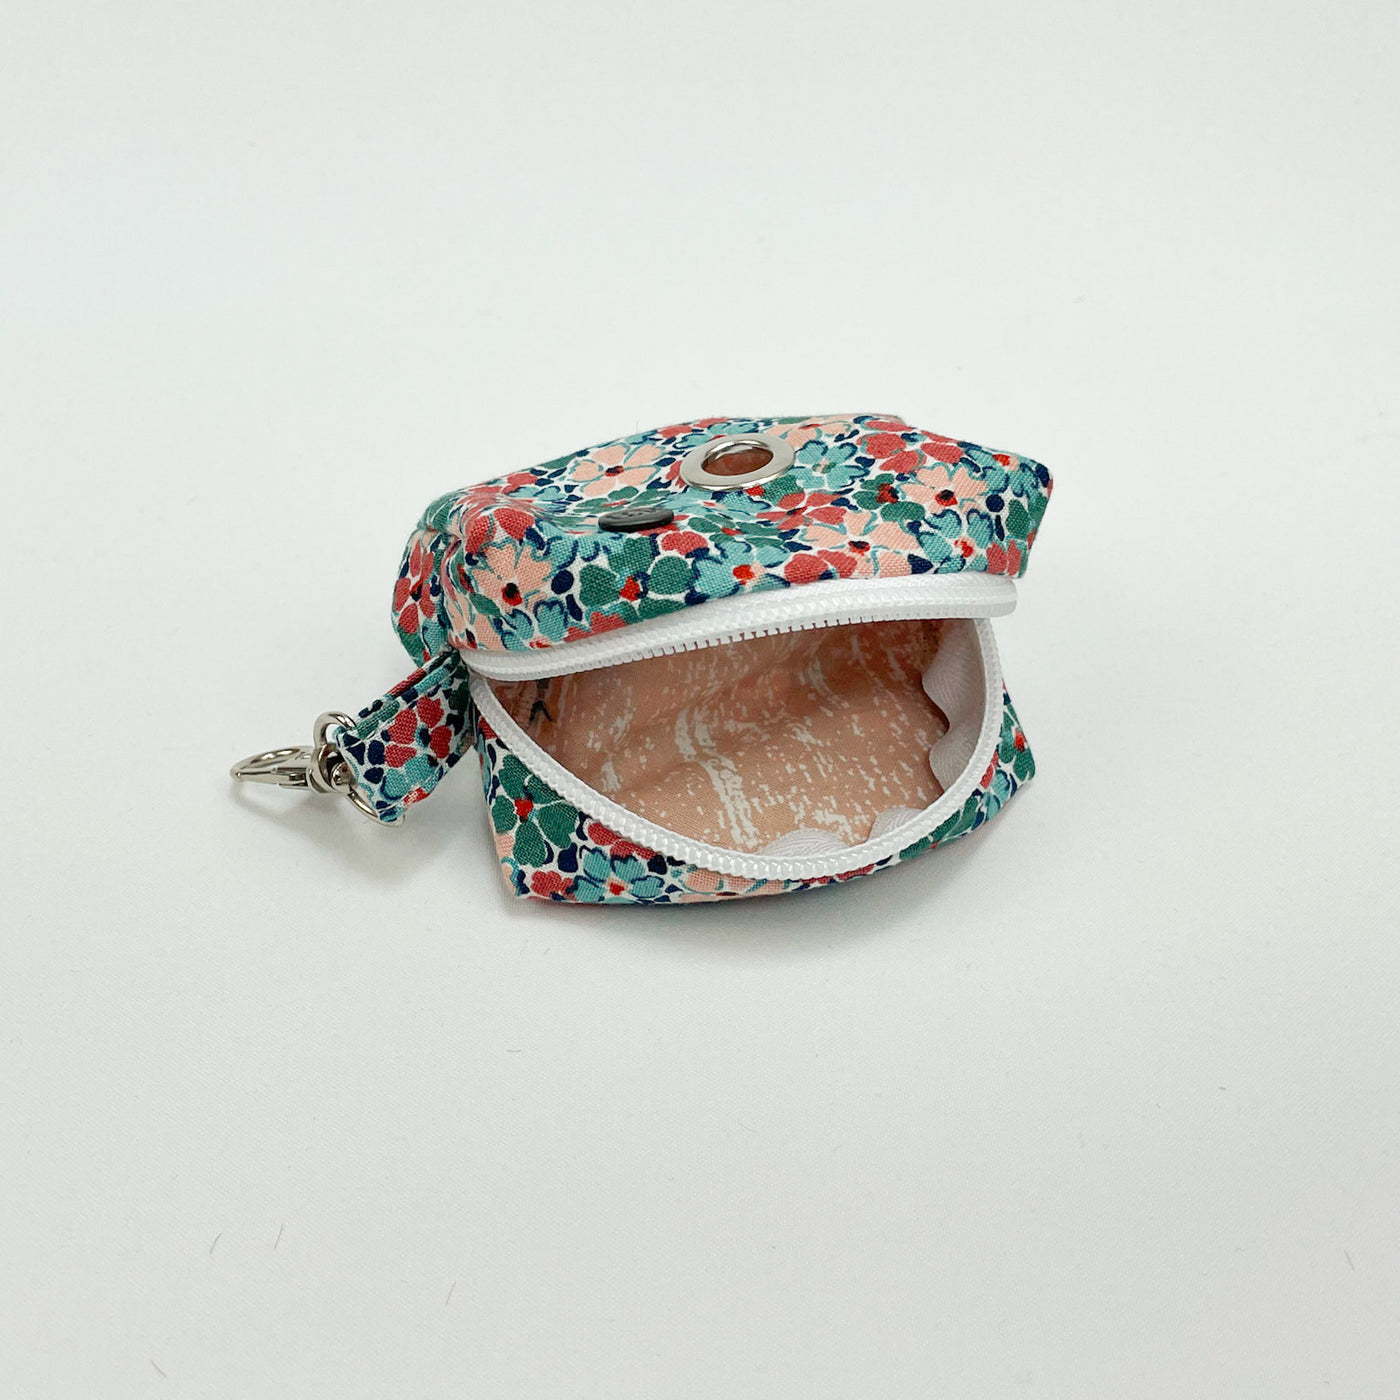 Liberty winter floral poop bag holder with fully lined interior